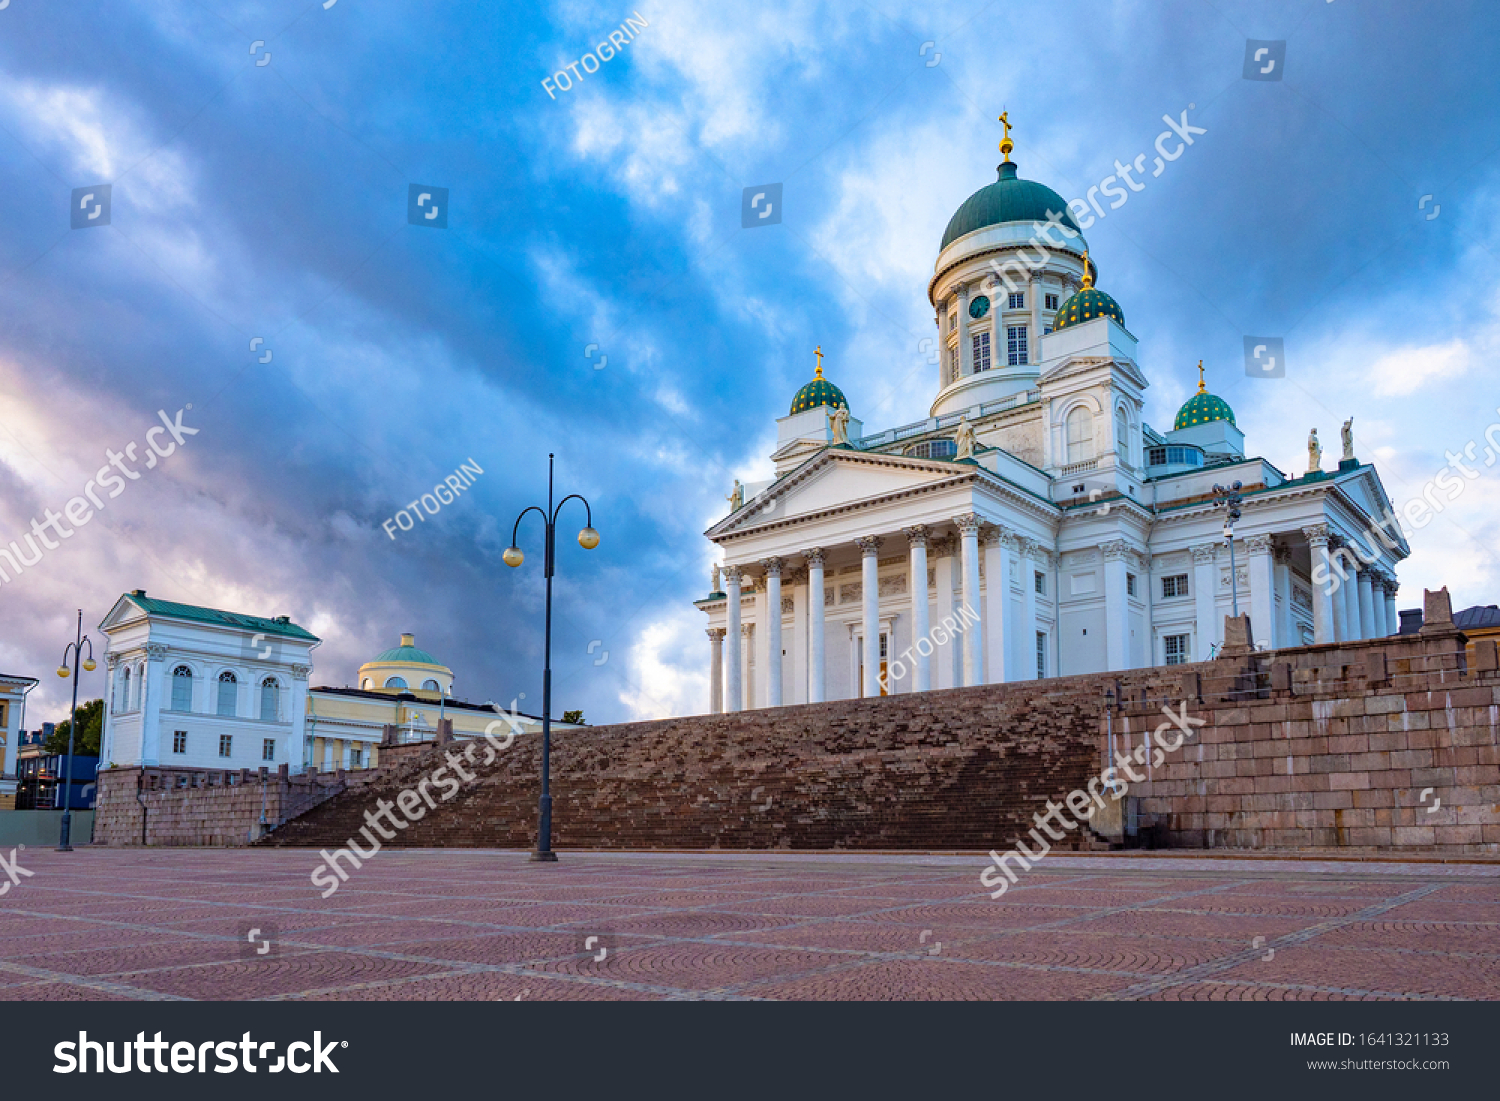 Helsinki. Finland St. Nicholas. Cathedrals on the background of blue sky. The square in front of the Helsinki Temple. The architecture of Finland. Orthodox church in Finland. Helsinki Tour. #1641321133